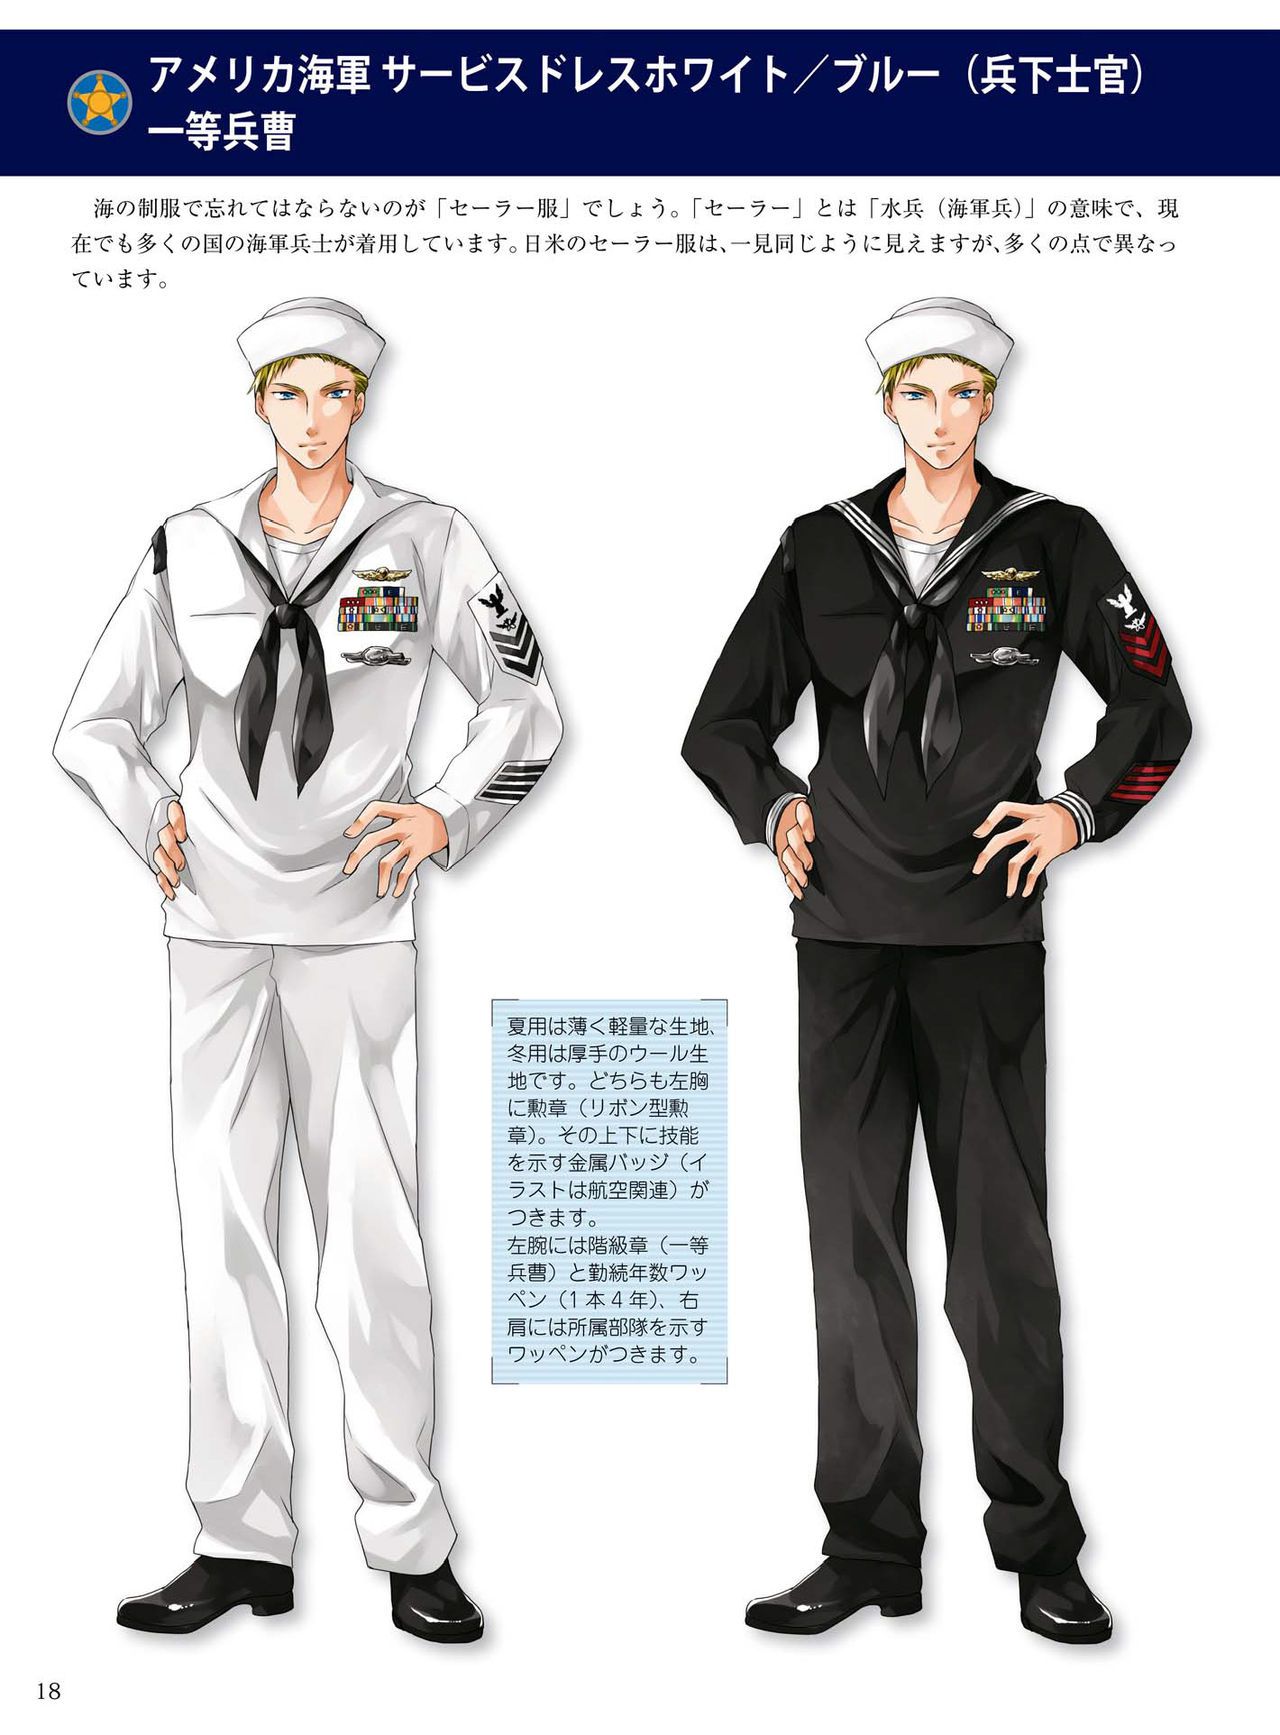 How to draw military uniforms and uniforms From Self-Defense Forces 軍服・制服の描き方 アメリカ軍・自衛隊の制服から戦闘服まで 21